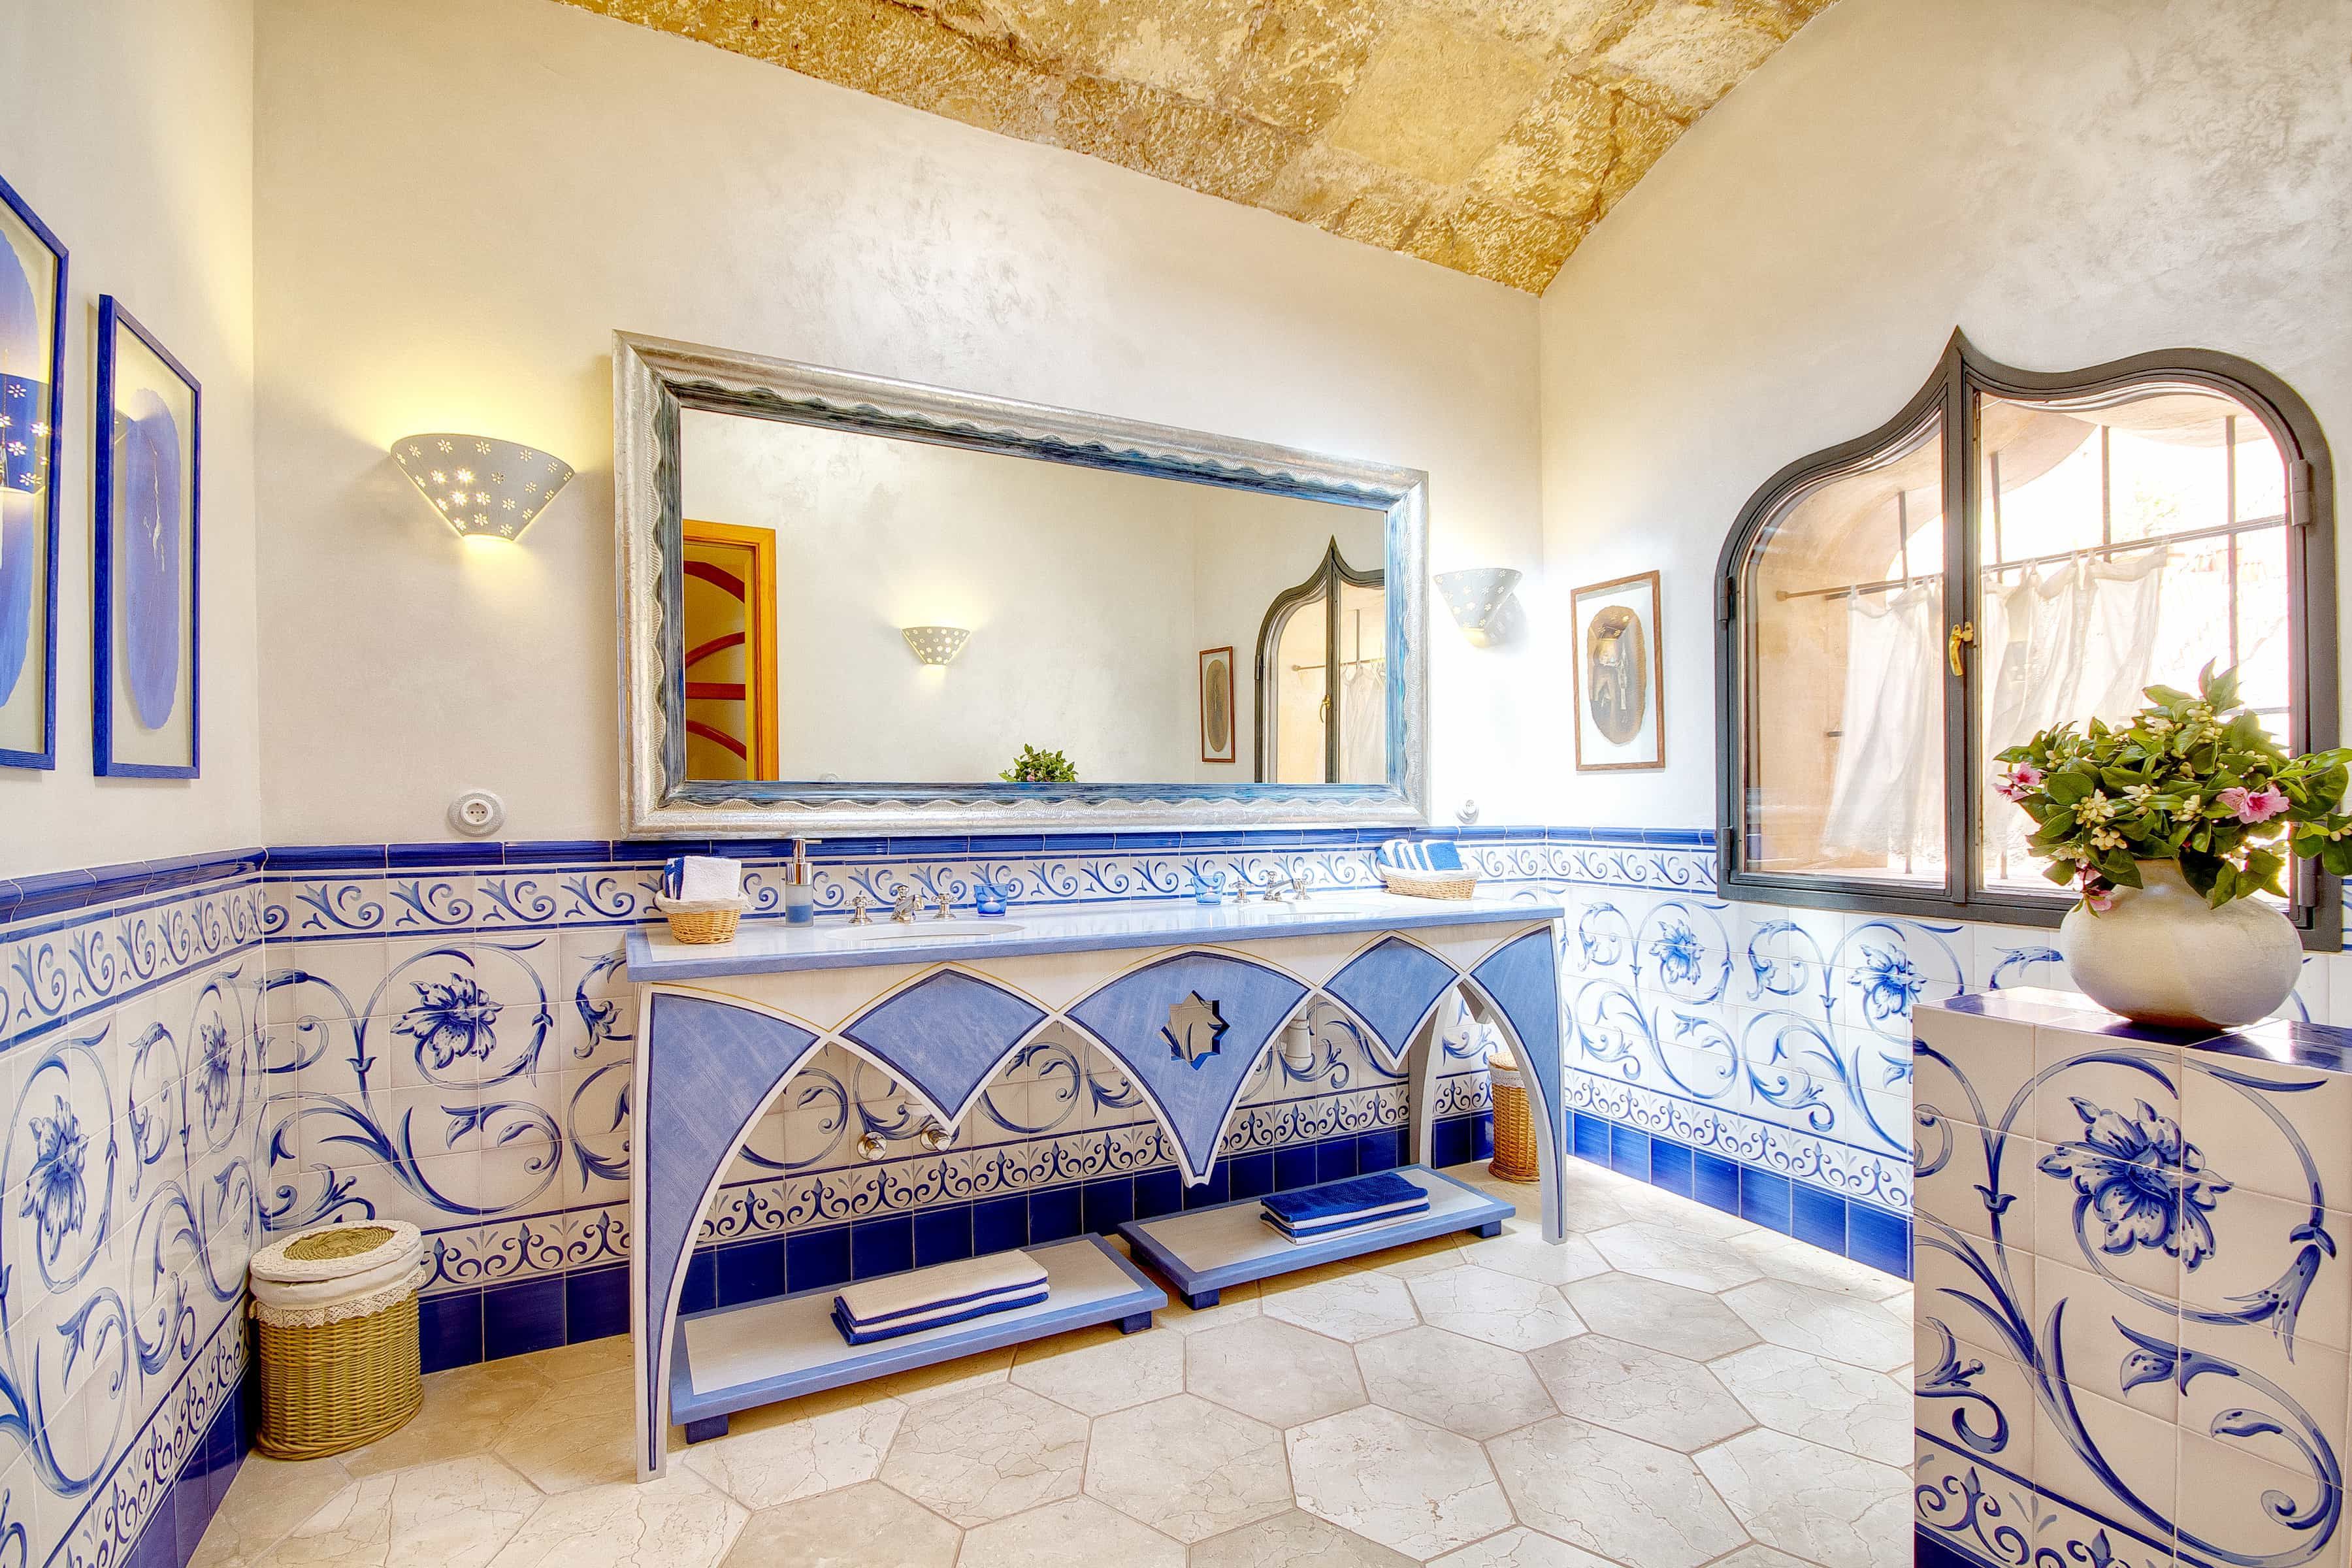 Beautiful Blue And White Mexican Bathroom With Tiles (View 10 of 10)